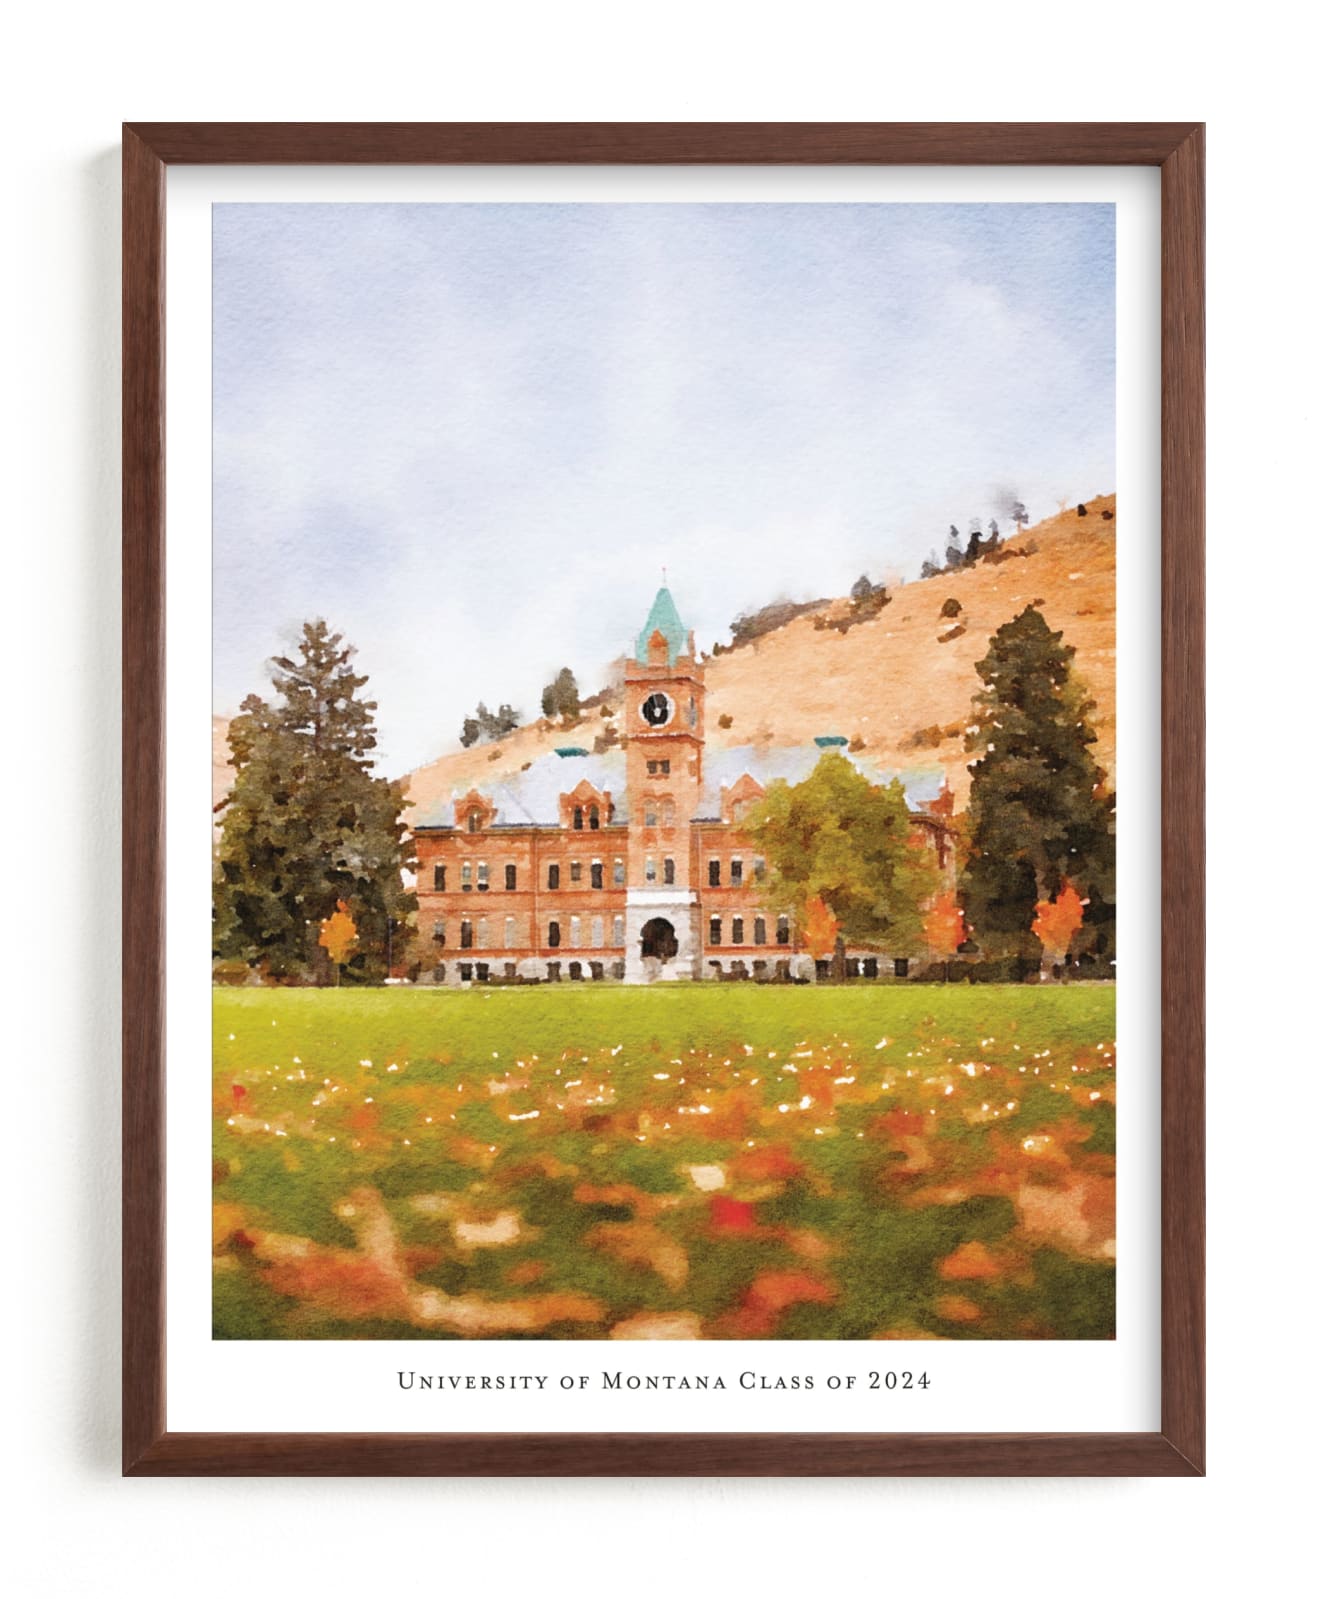 This is a colorful photos to art  by Minted called Custom Campus Portrait with Text.